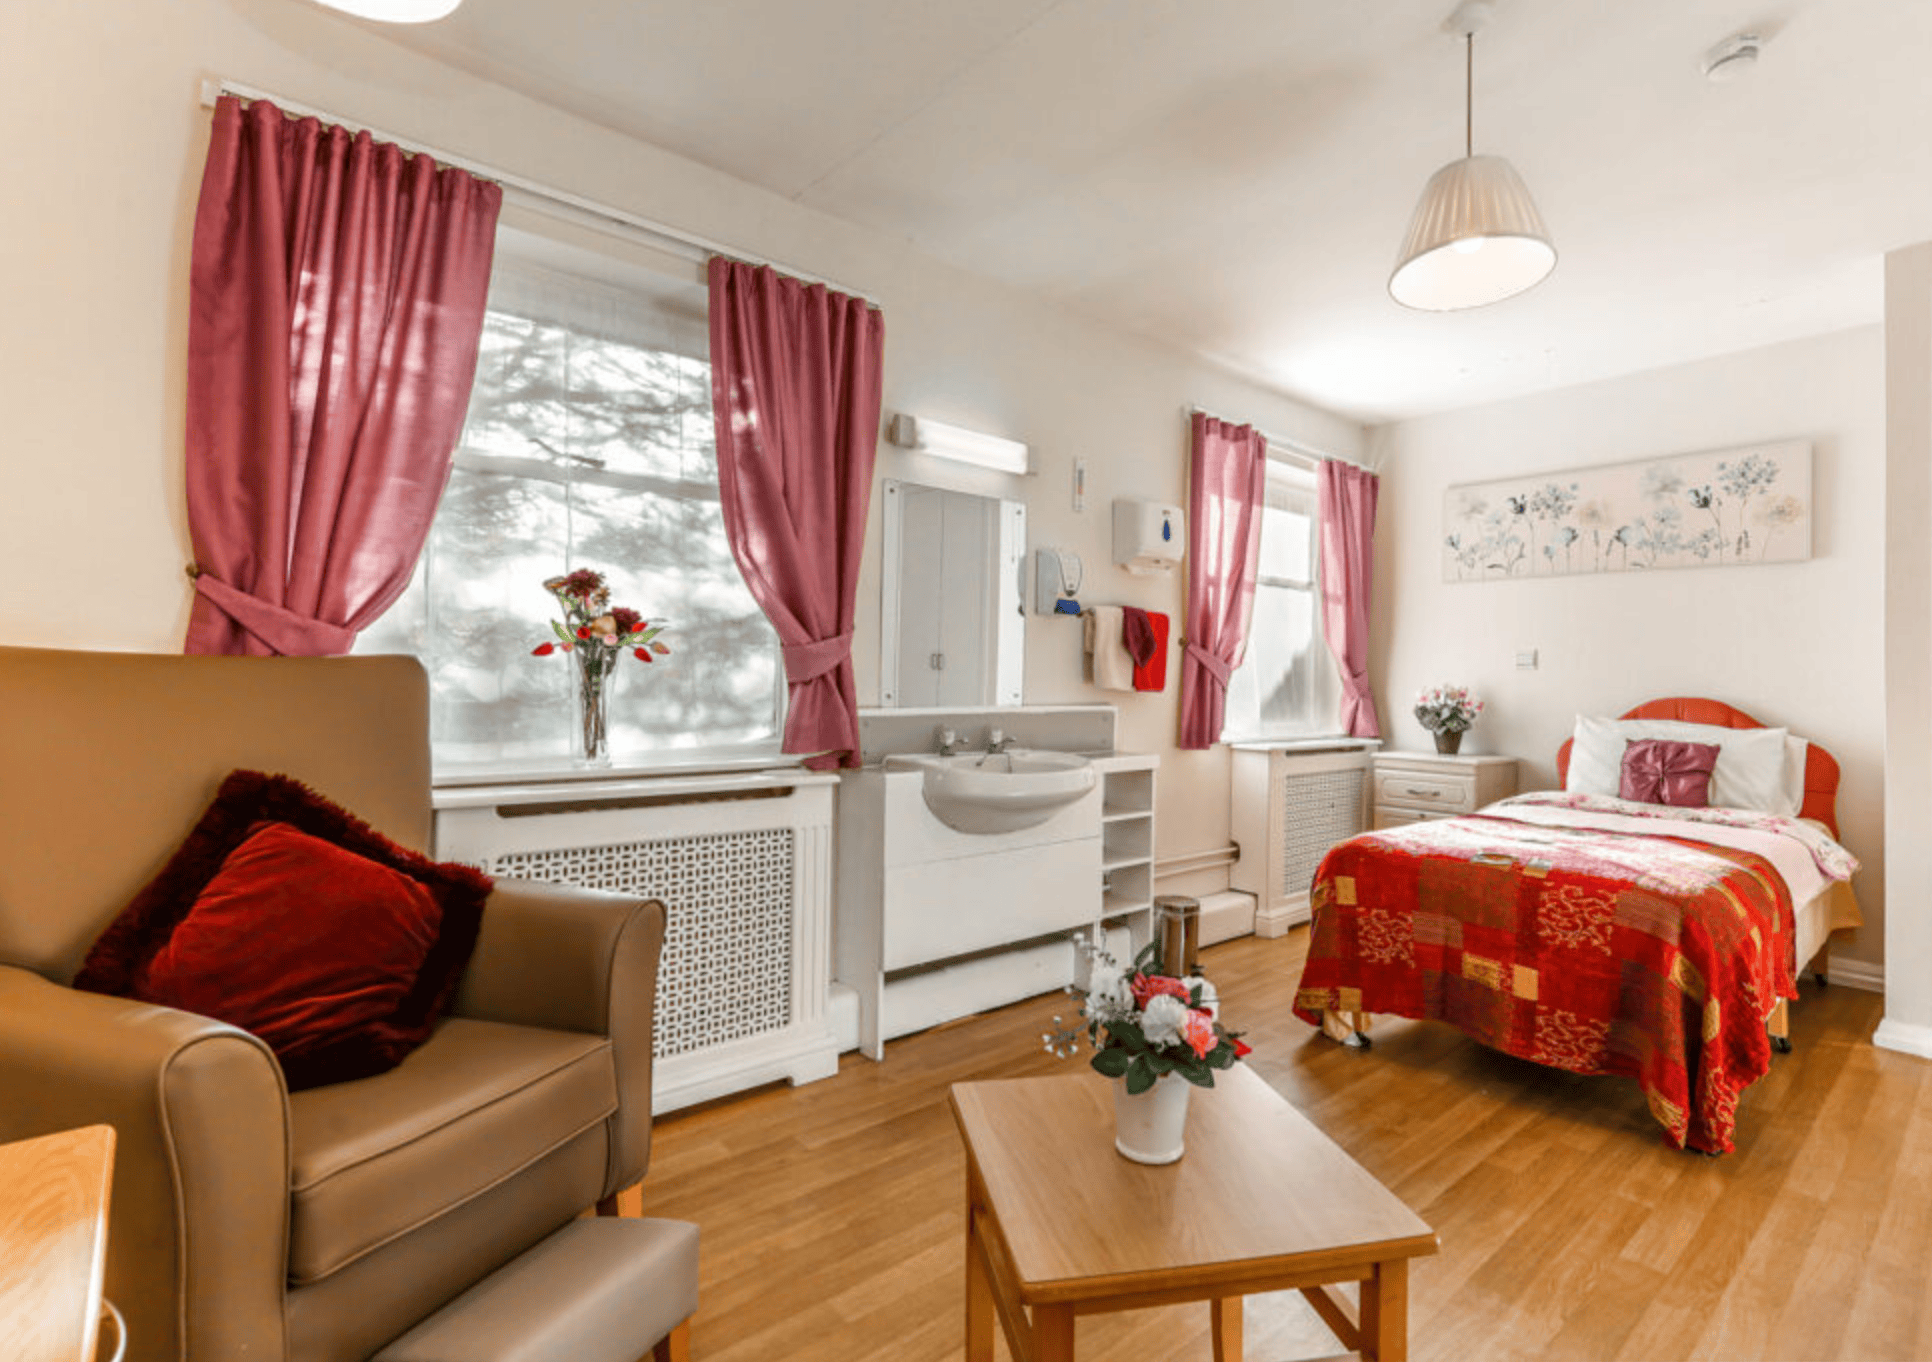 Bedroom of The Hawthorns Care Home in Wilmslow, Cheshire East